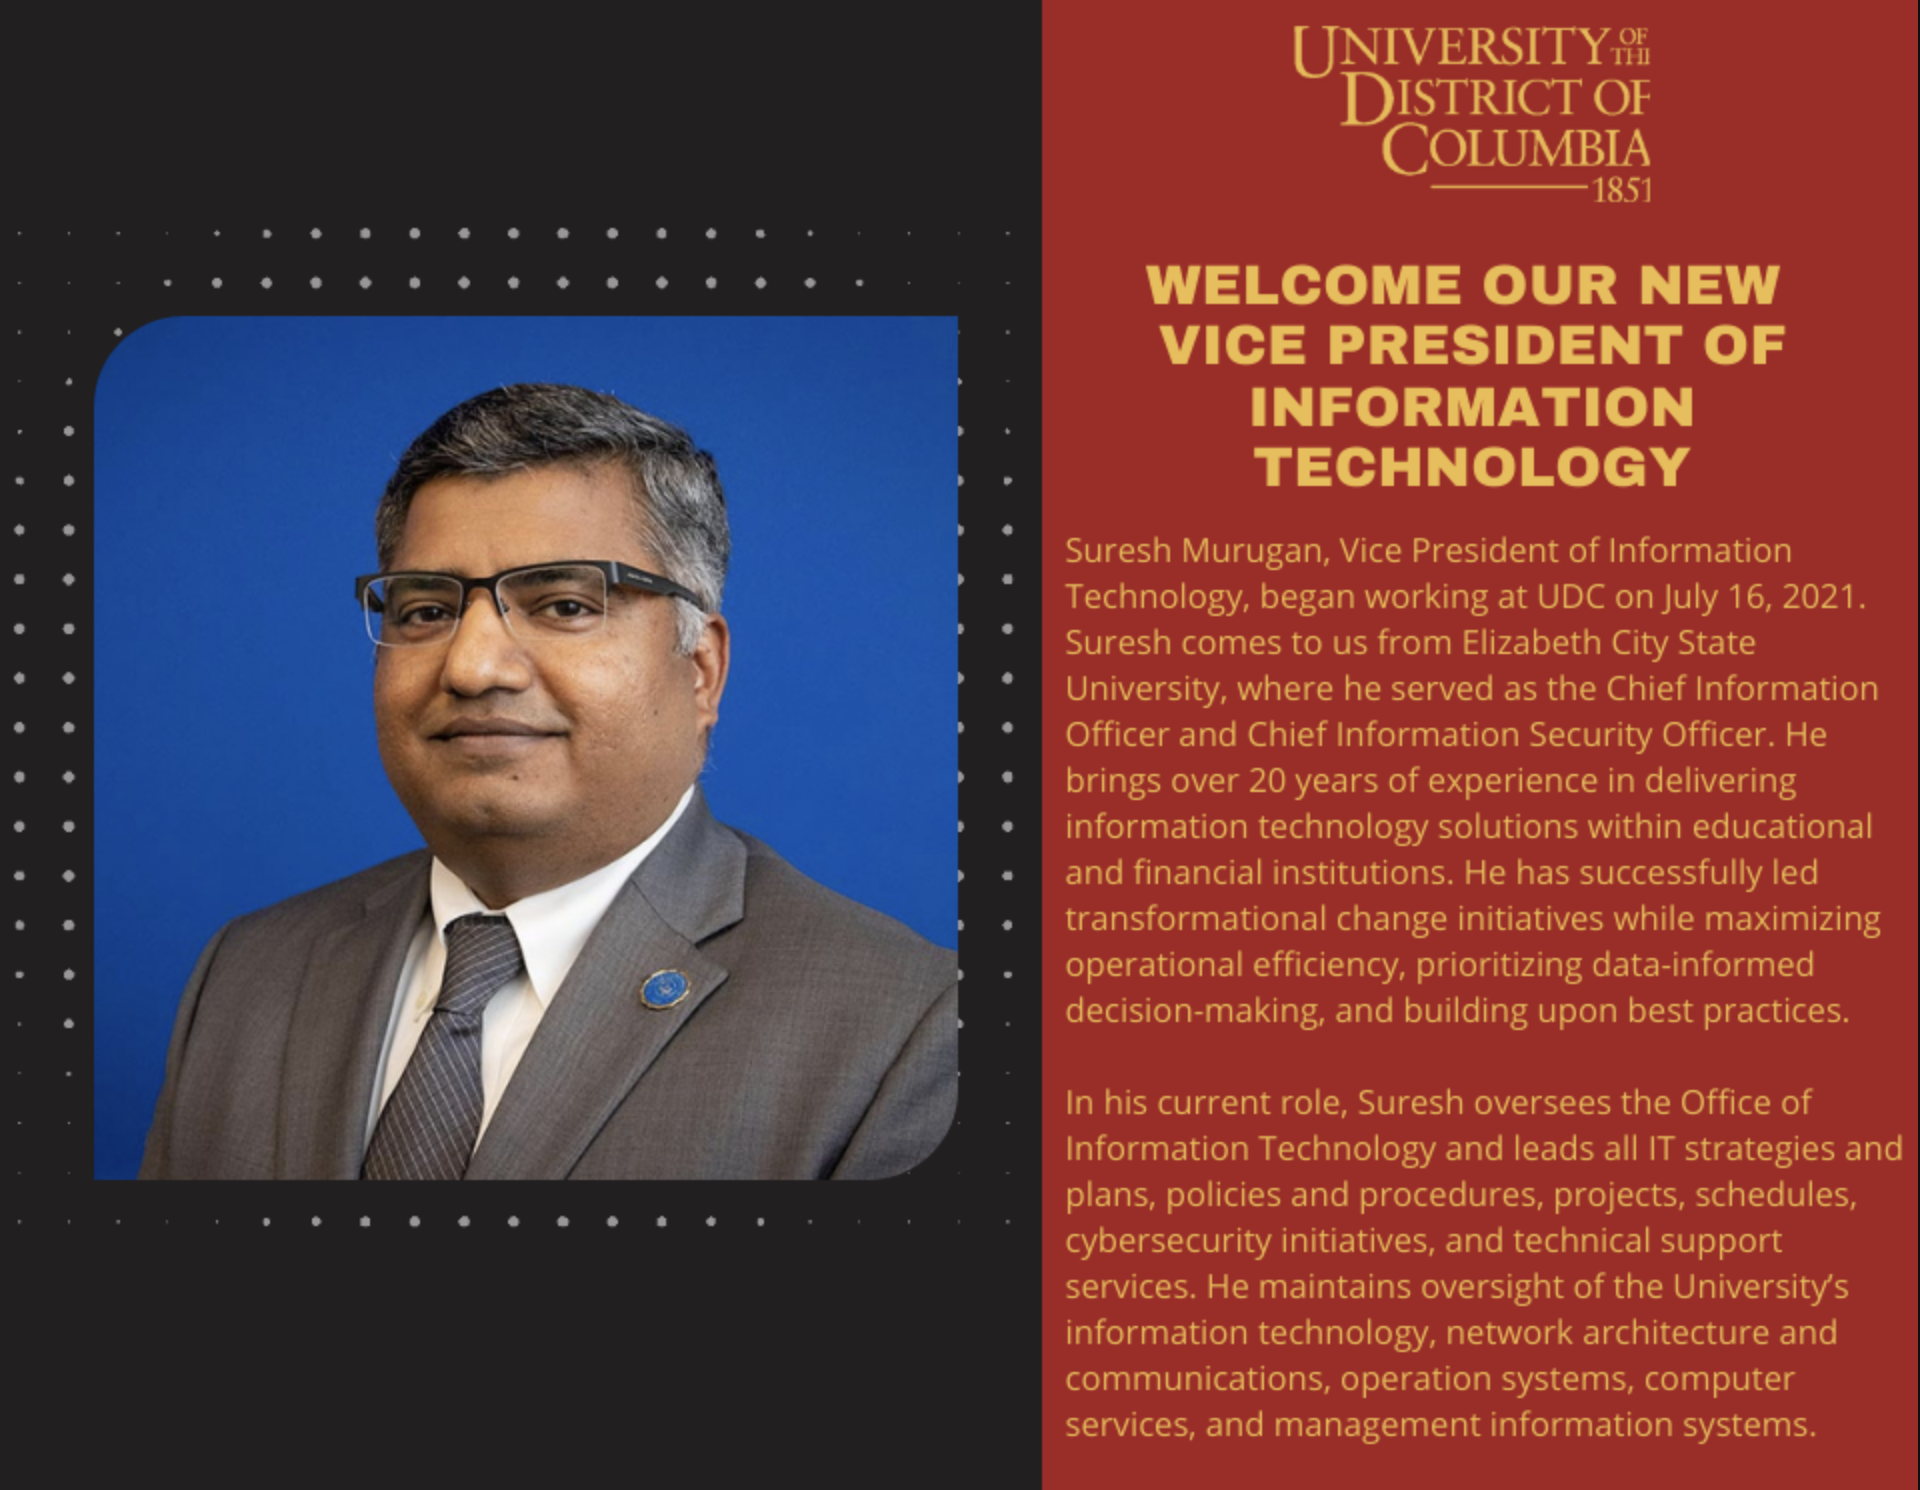 Welcome our new Vice President of Information Technology